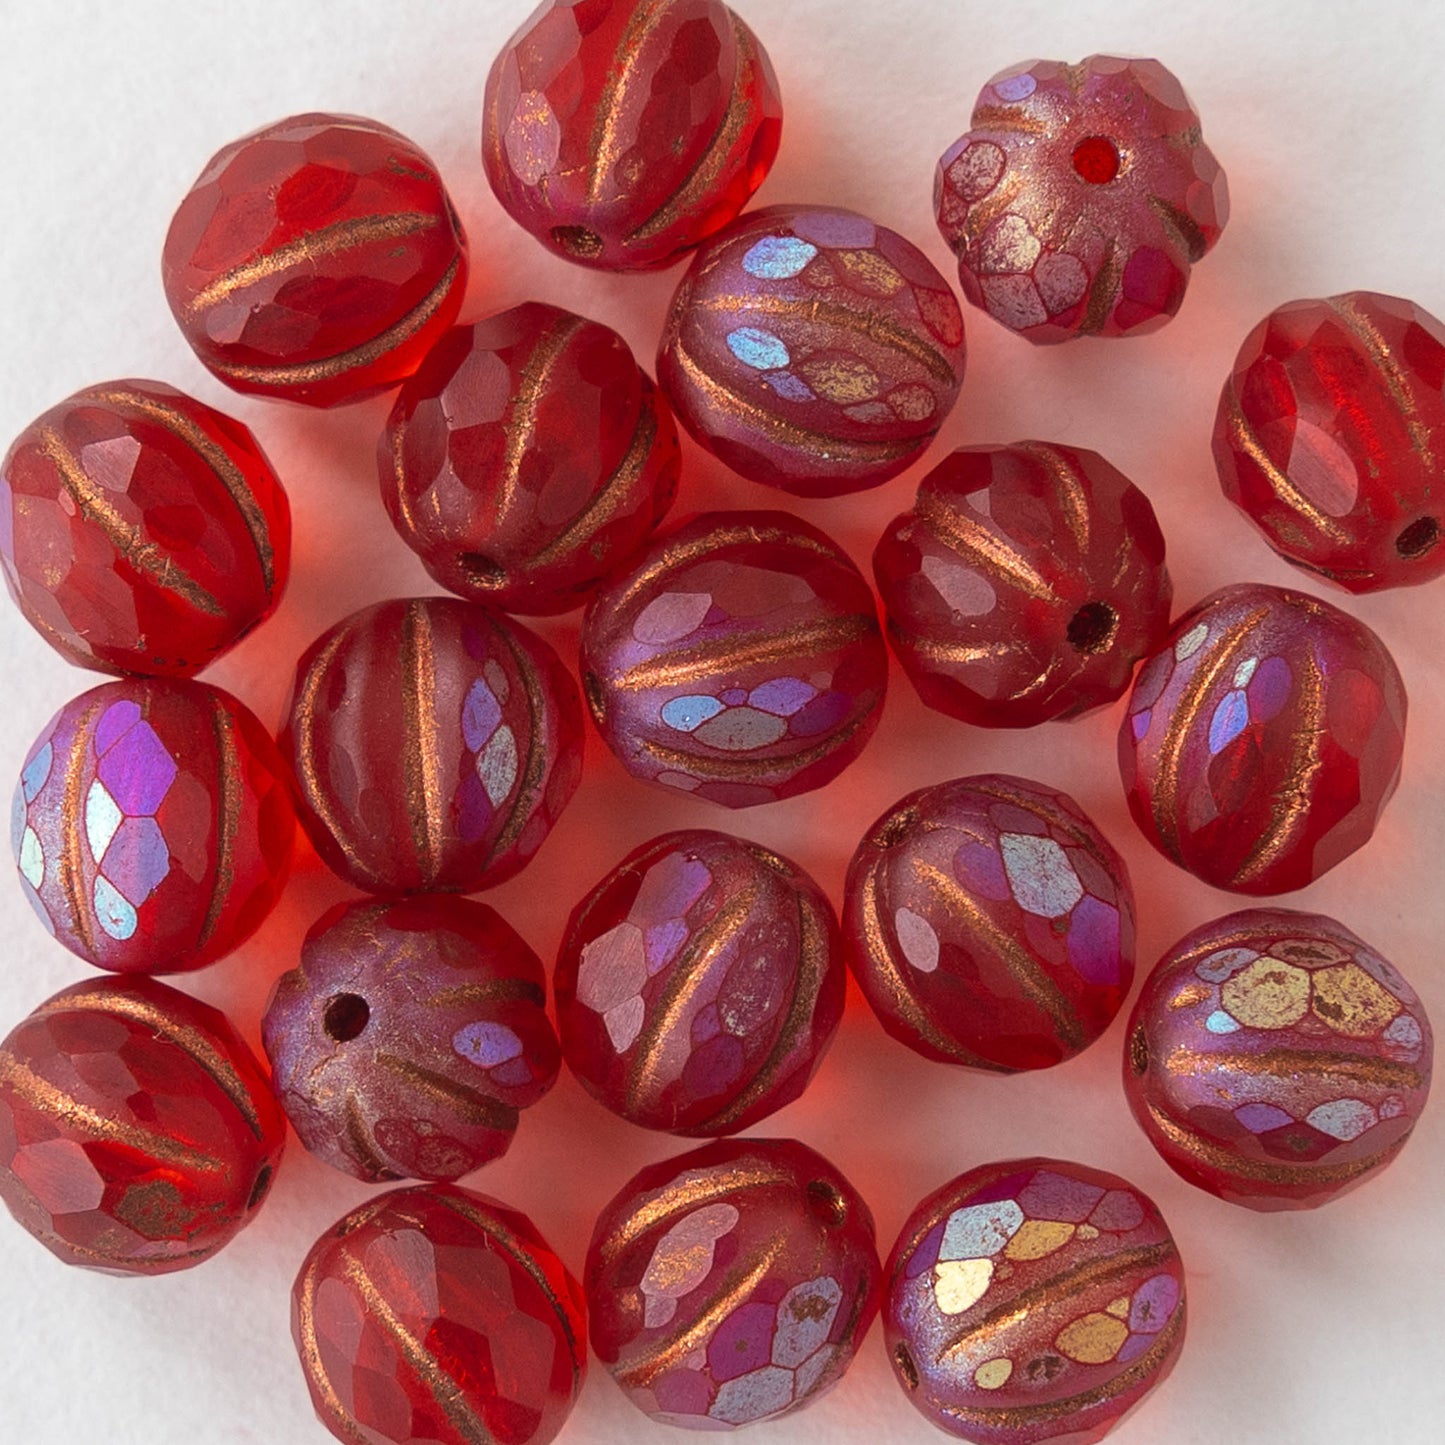 8mm Faceted Round Melon Beads - Red Semi Matte with AB Copper Wash - 20 beads